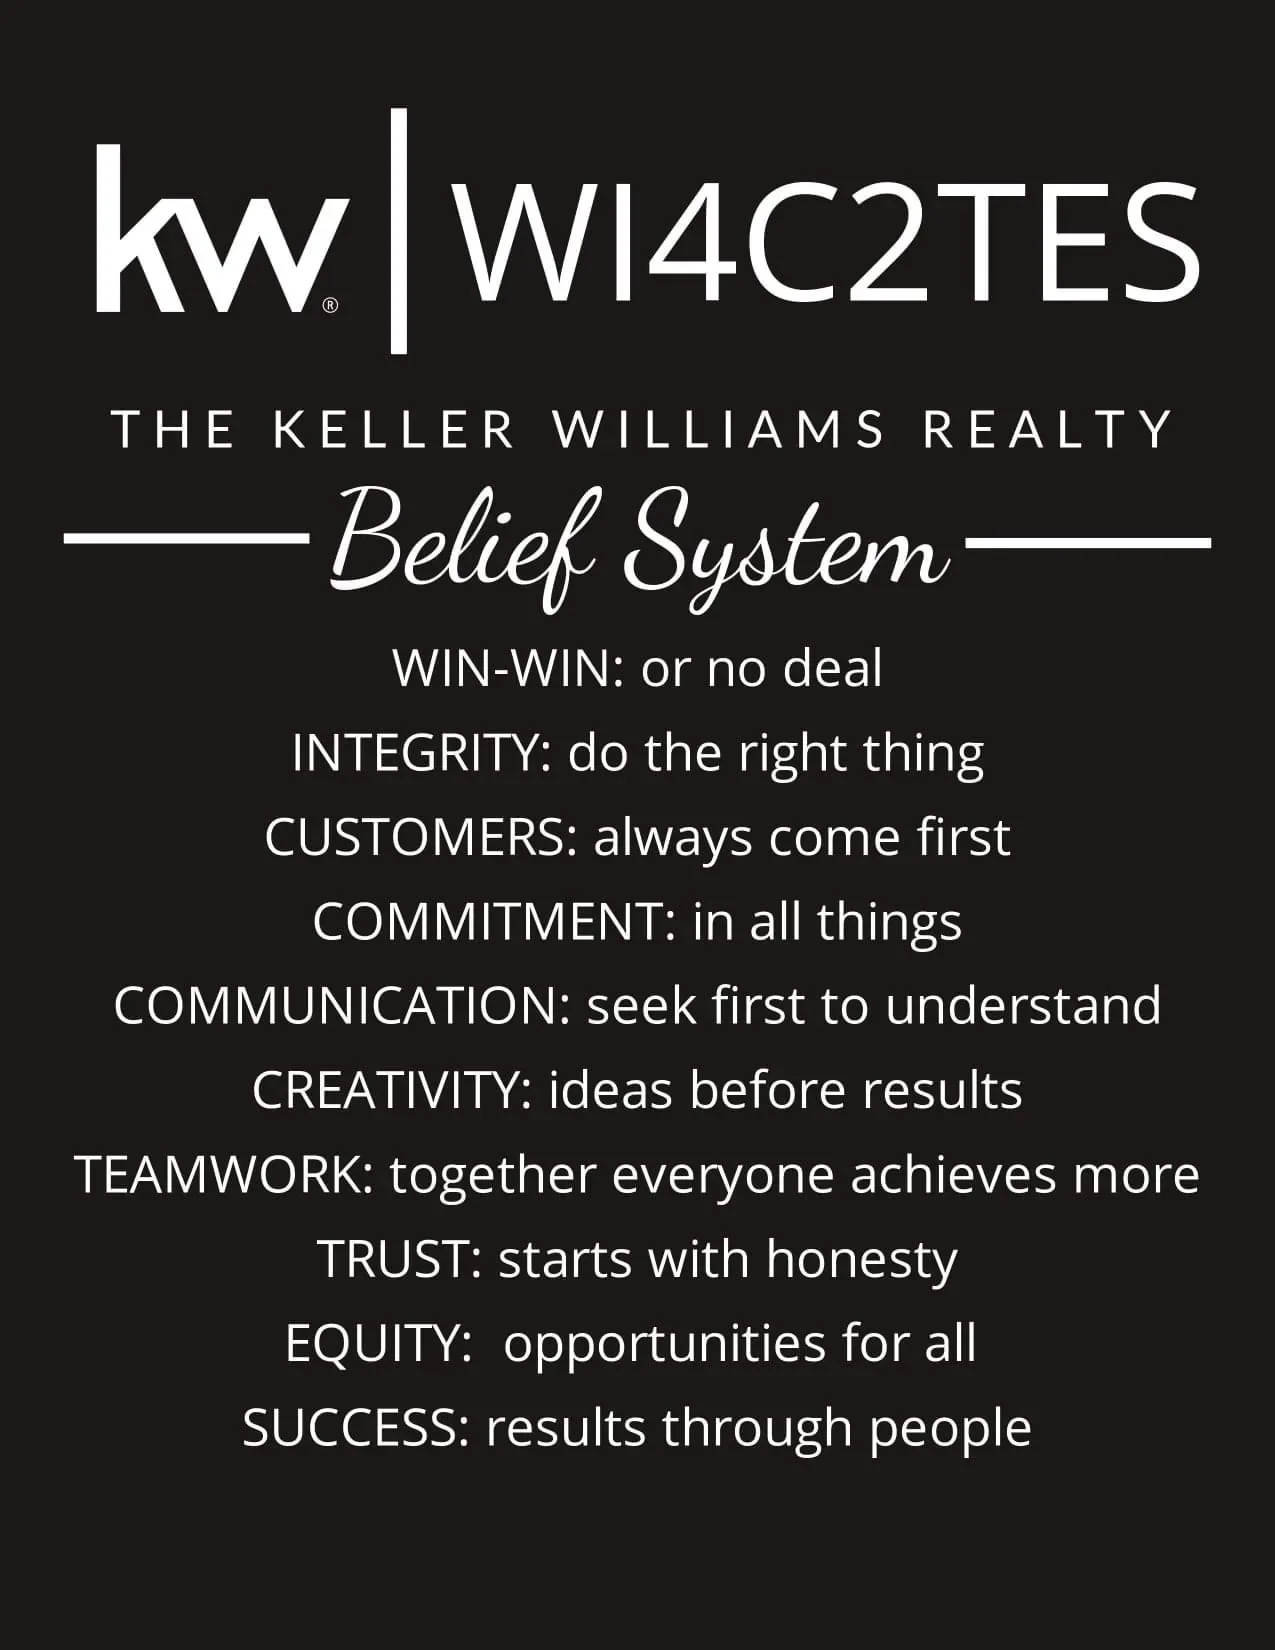 Belief System win-win or no deal integrity means do the right thing customers always come first commitment in all things communication means seek first to understand creativity is ideas before results teamwork means together everyone achieves more trust starts with honest equity is opportunities for all success is results through people